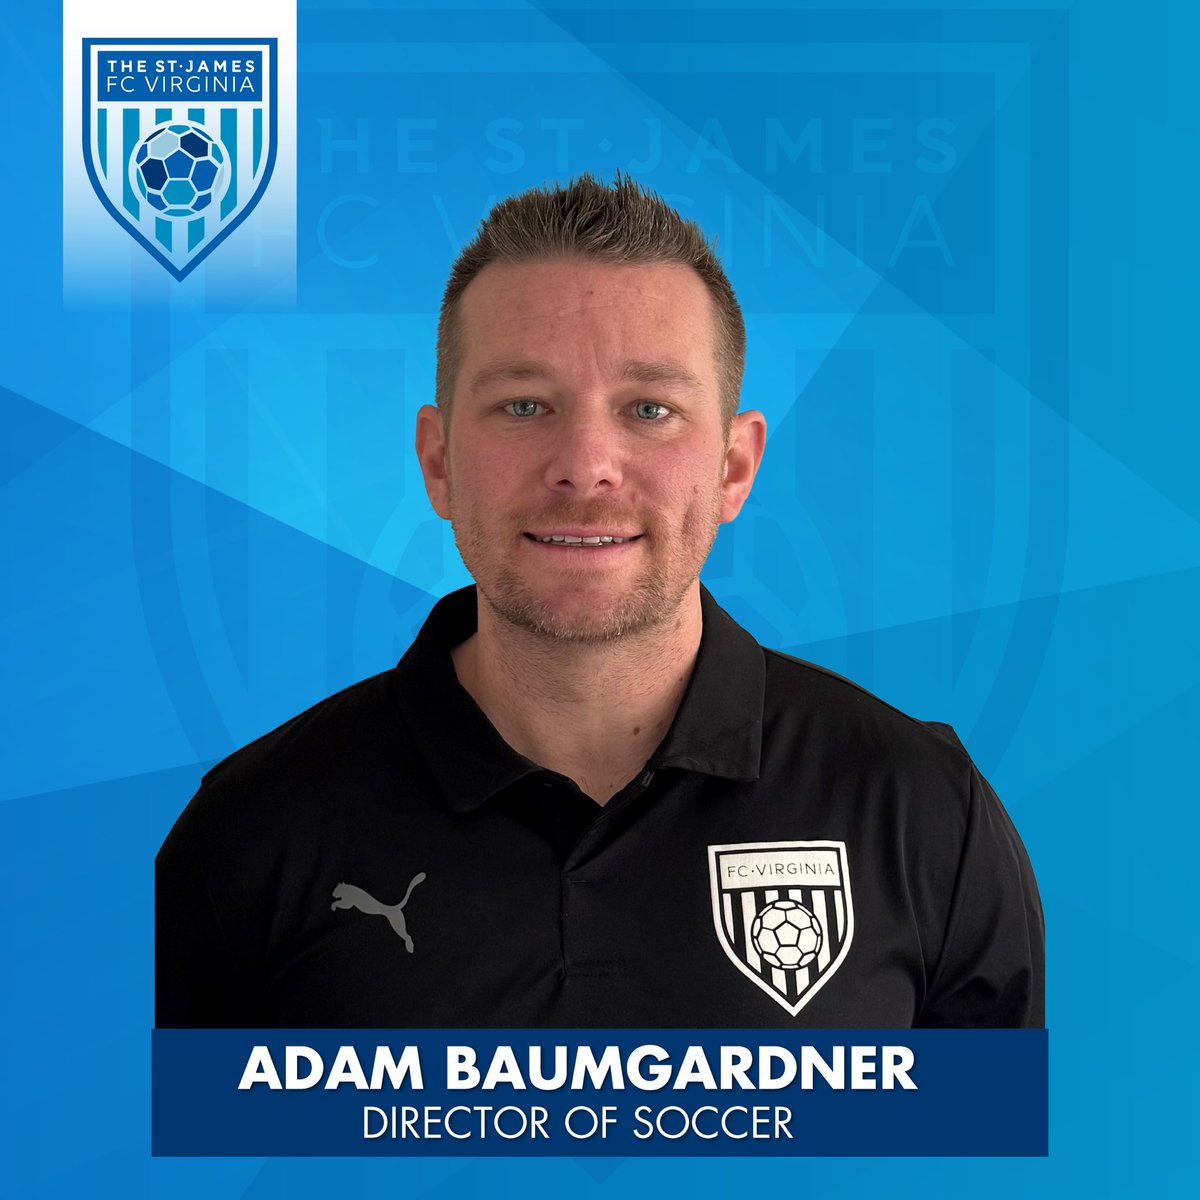 We're thrilled to introduce Adam Baumgardner as the new Director of Soccer for The St. James FC Virginia! 🌟 With his passion for the game and proven leadership, we're confident in the bright future ahead for our TSJ FCV athletes. Congratulations, Adam! 🙌